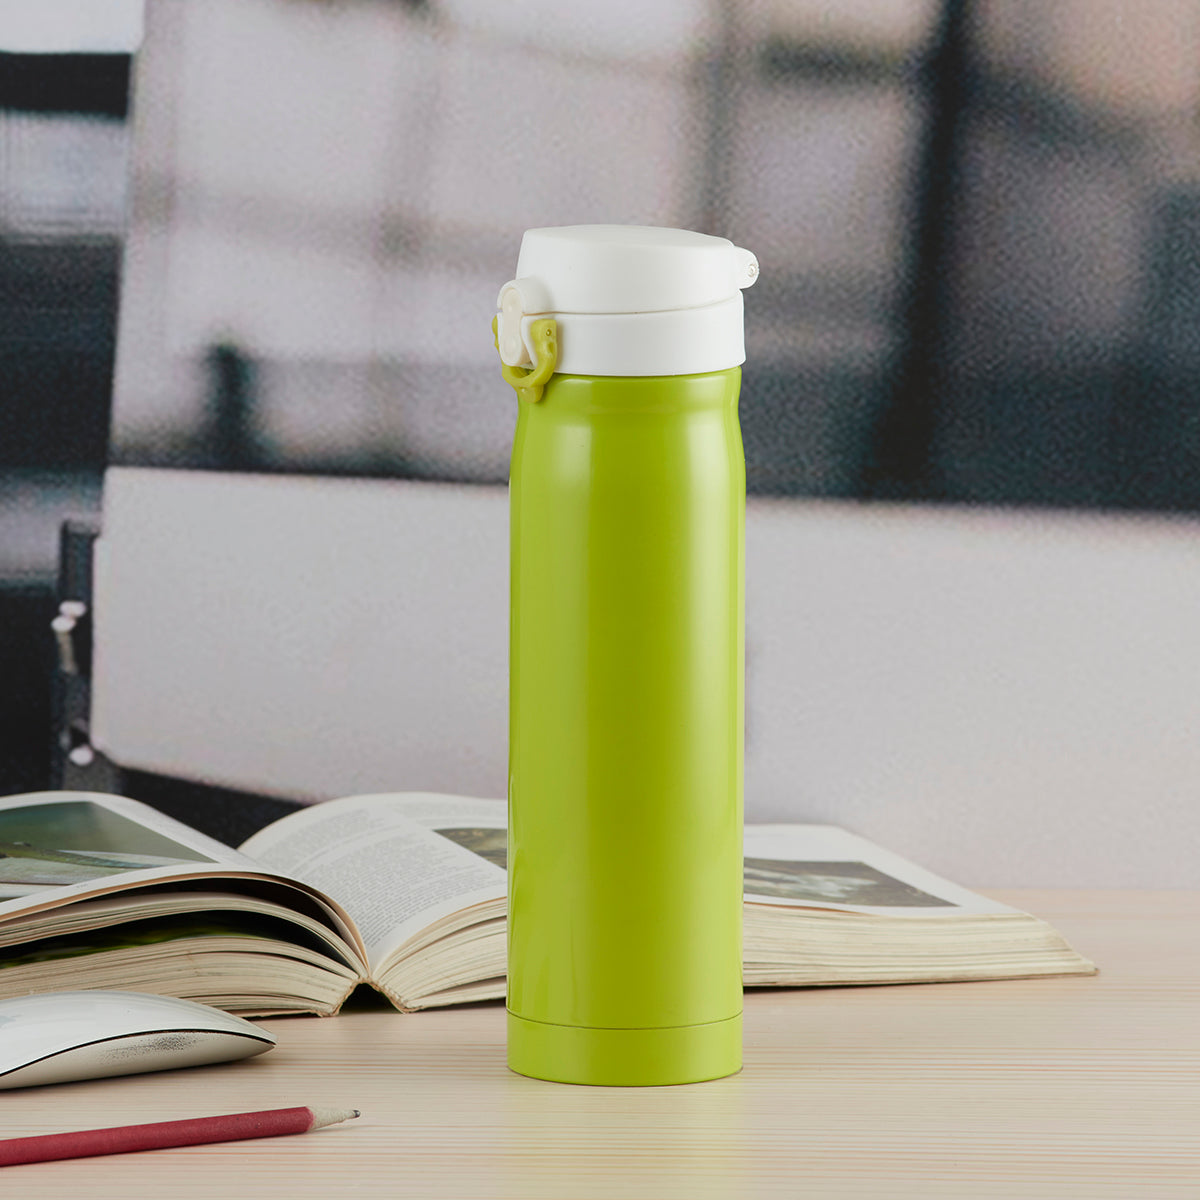 Stainless Steel Vacuum Insulated double wall Water Bottle for Home, Office, Travel and Sports, Leak - proof Lid for Hot and Cold liquids - 500ml (1666)